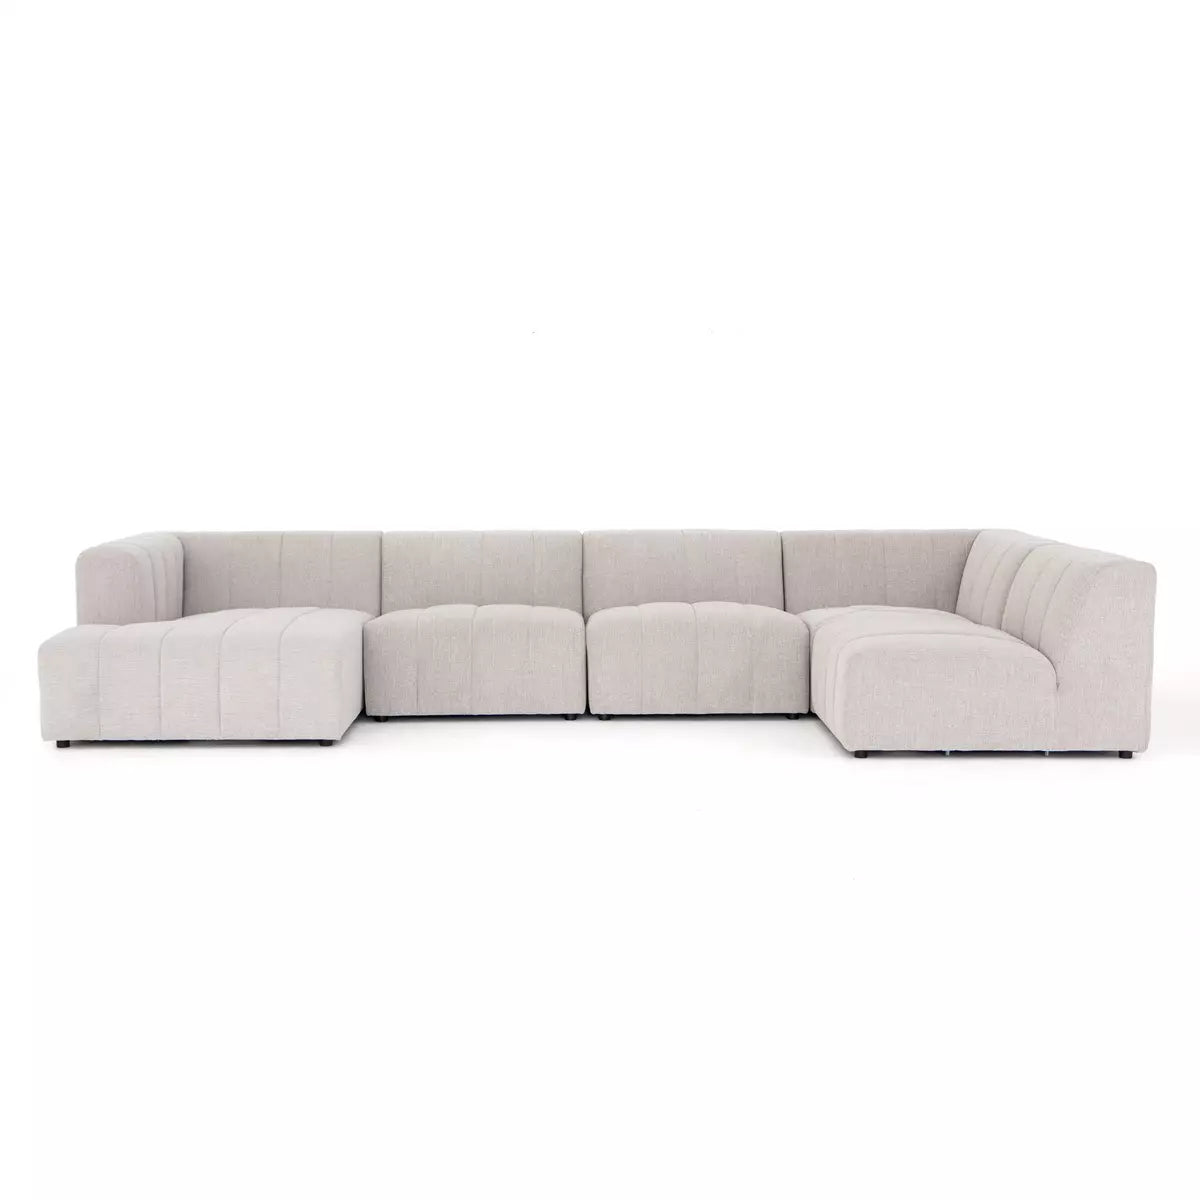 Langham Channeled 5 Piece Sectional